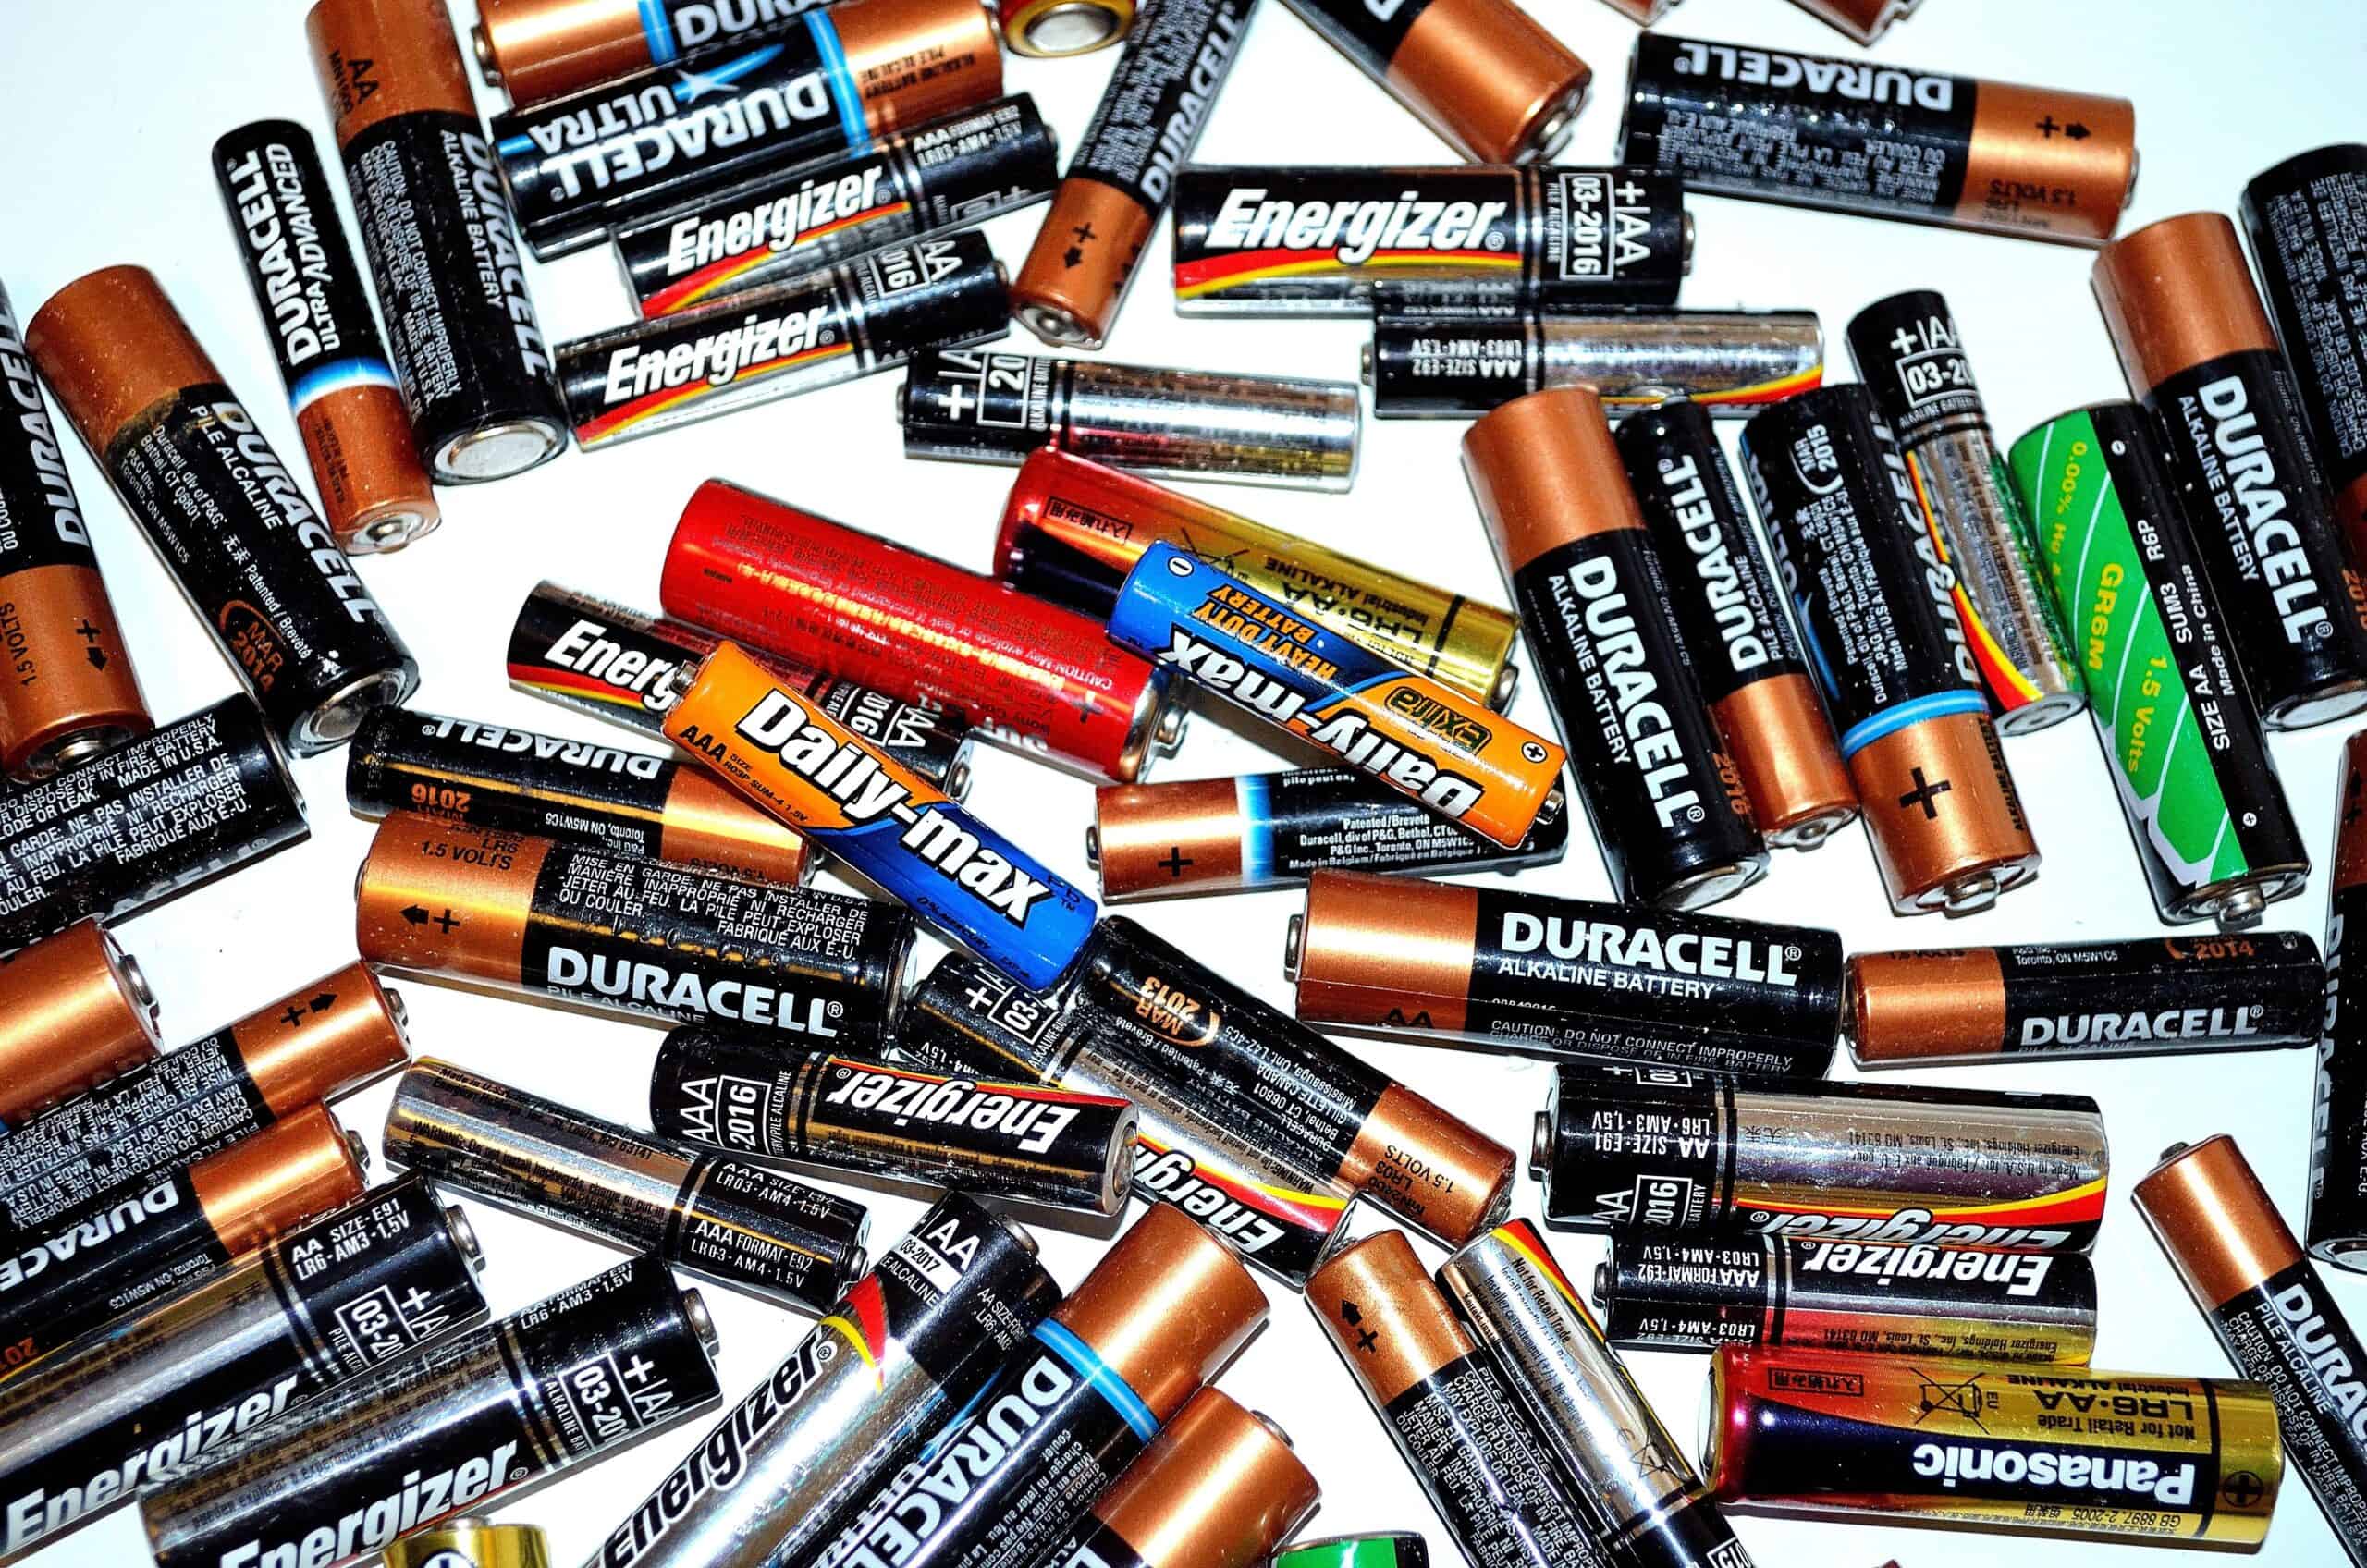 France encourages battery recycling projects